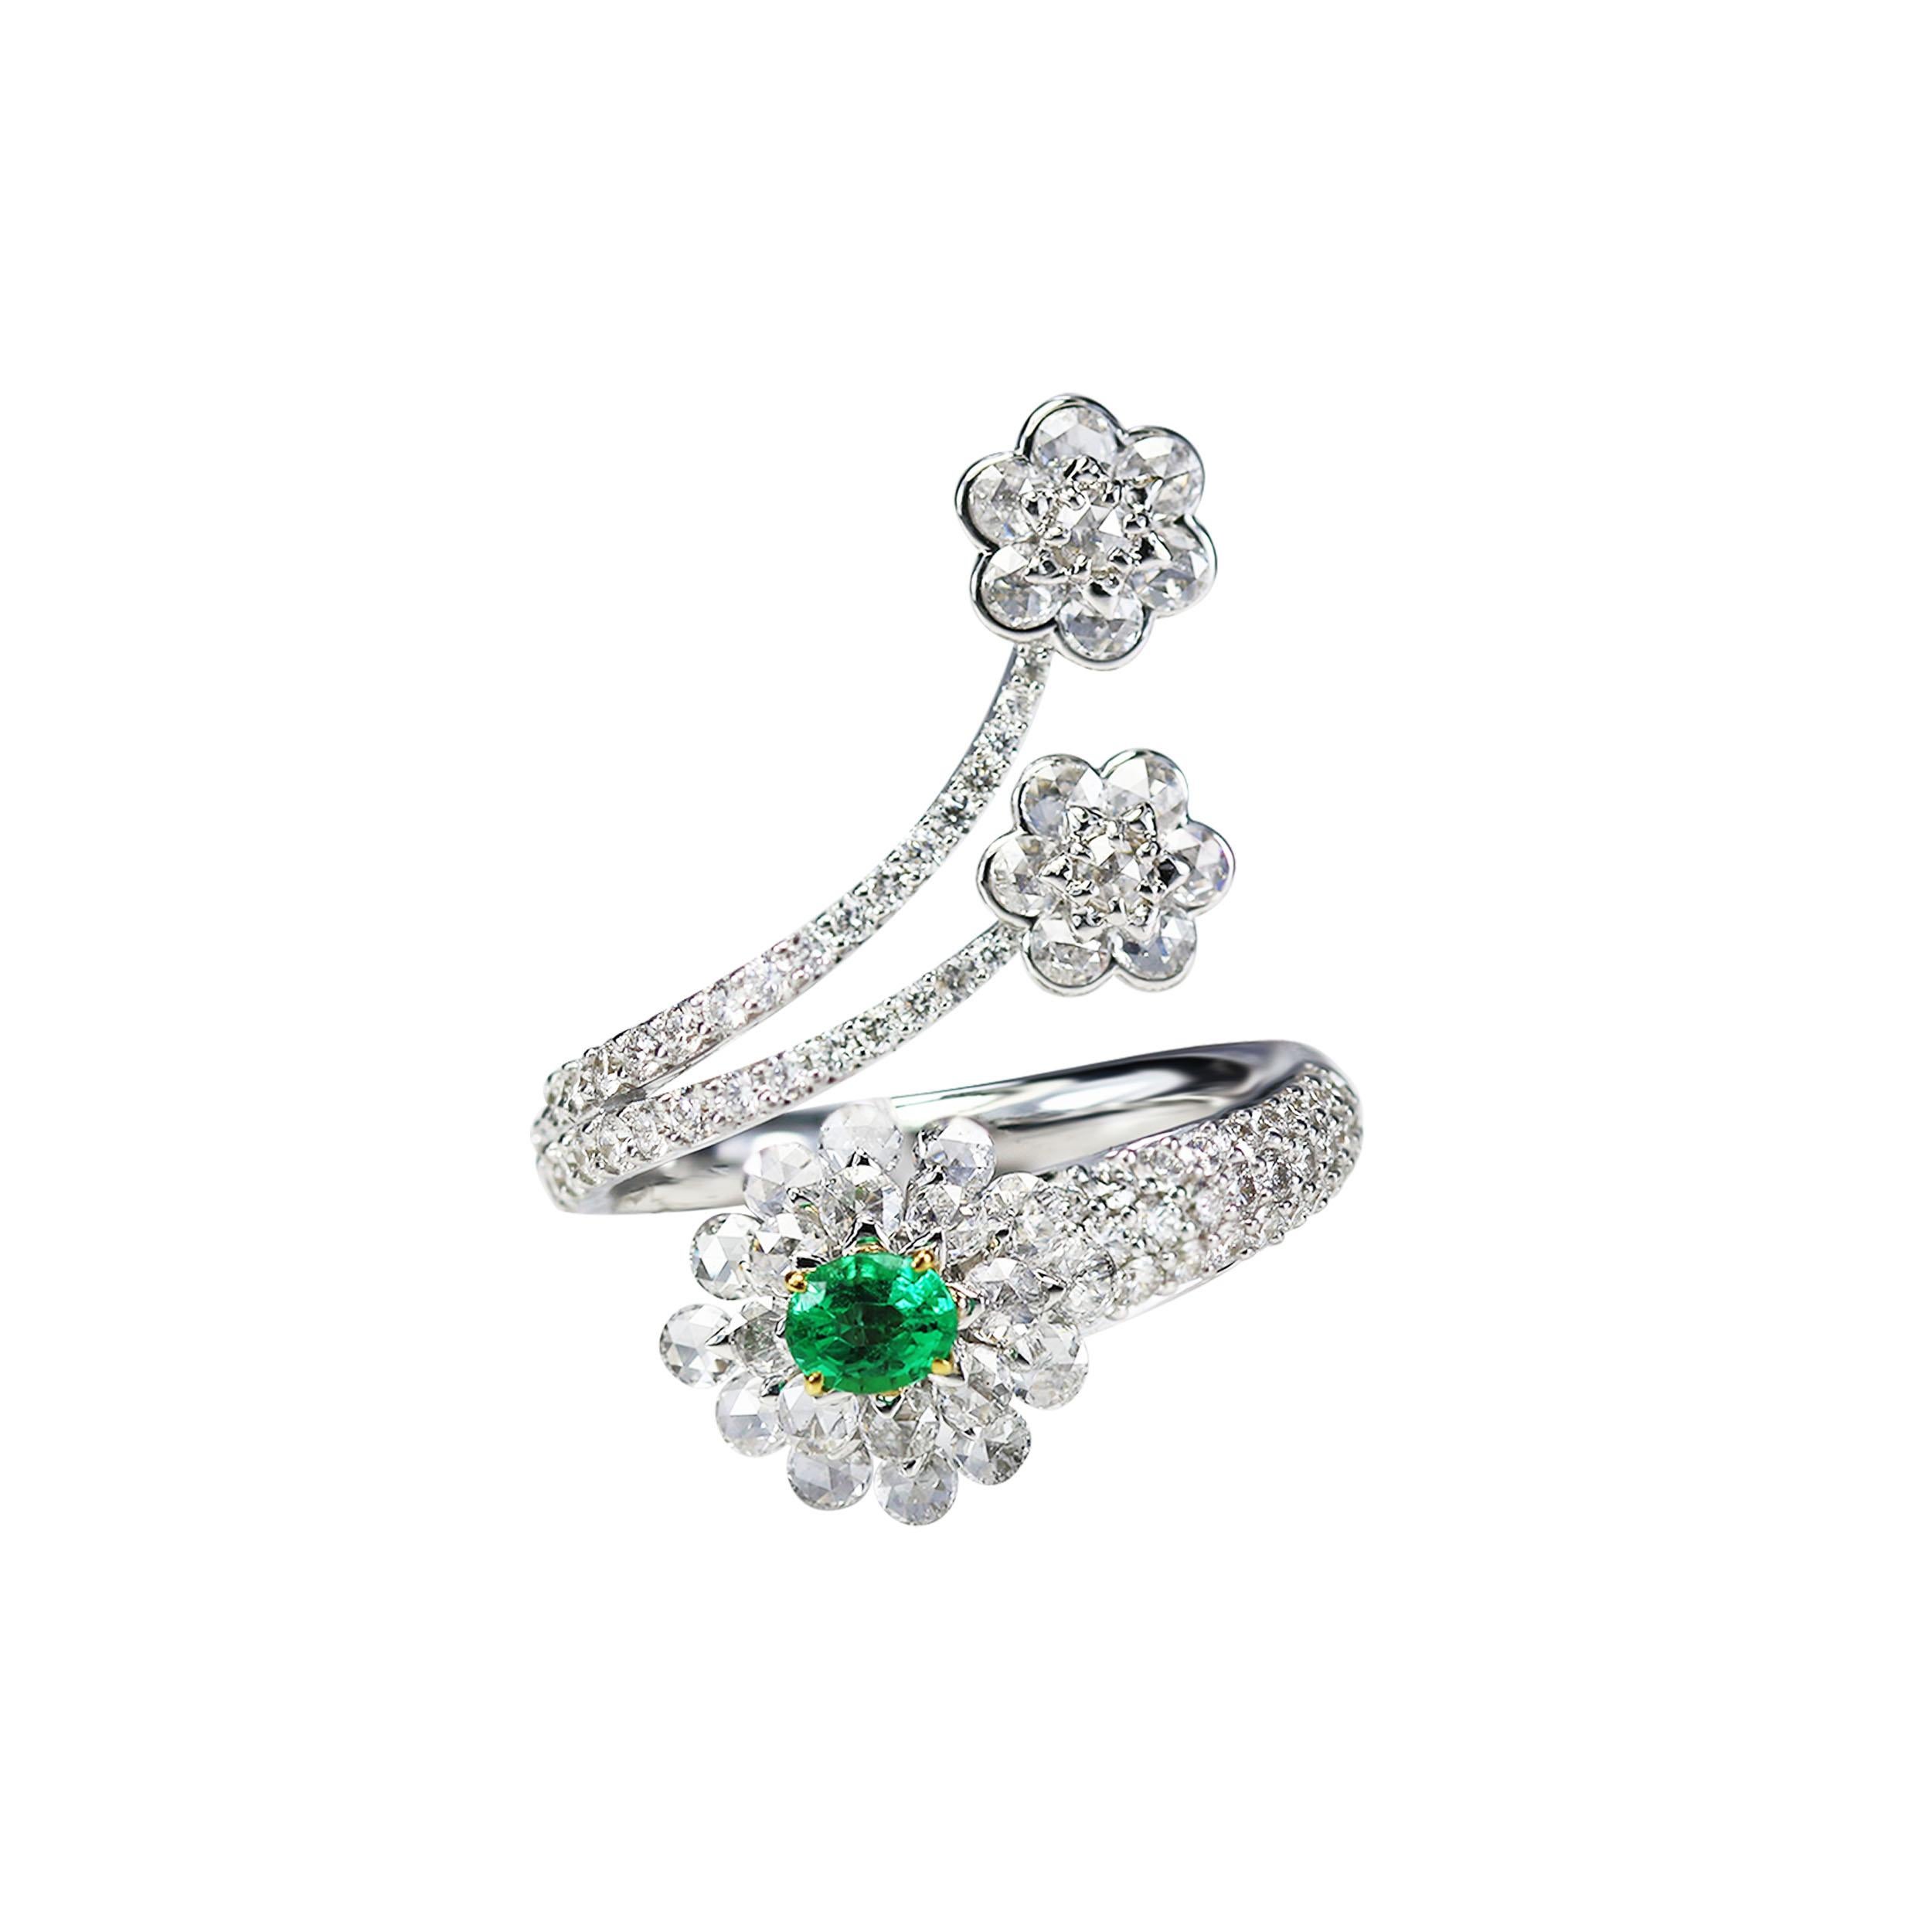 Studio Rêves Diamonds and Emerald Cocktail Cluster Ring in 18 Karat Gold In New Condition For Sale In Mumbai, Maharashtra